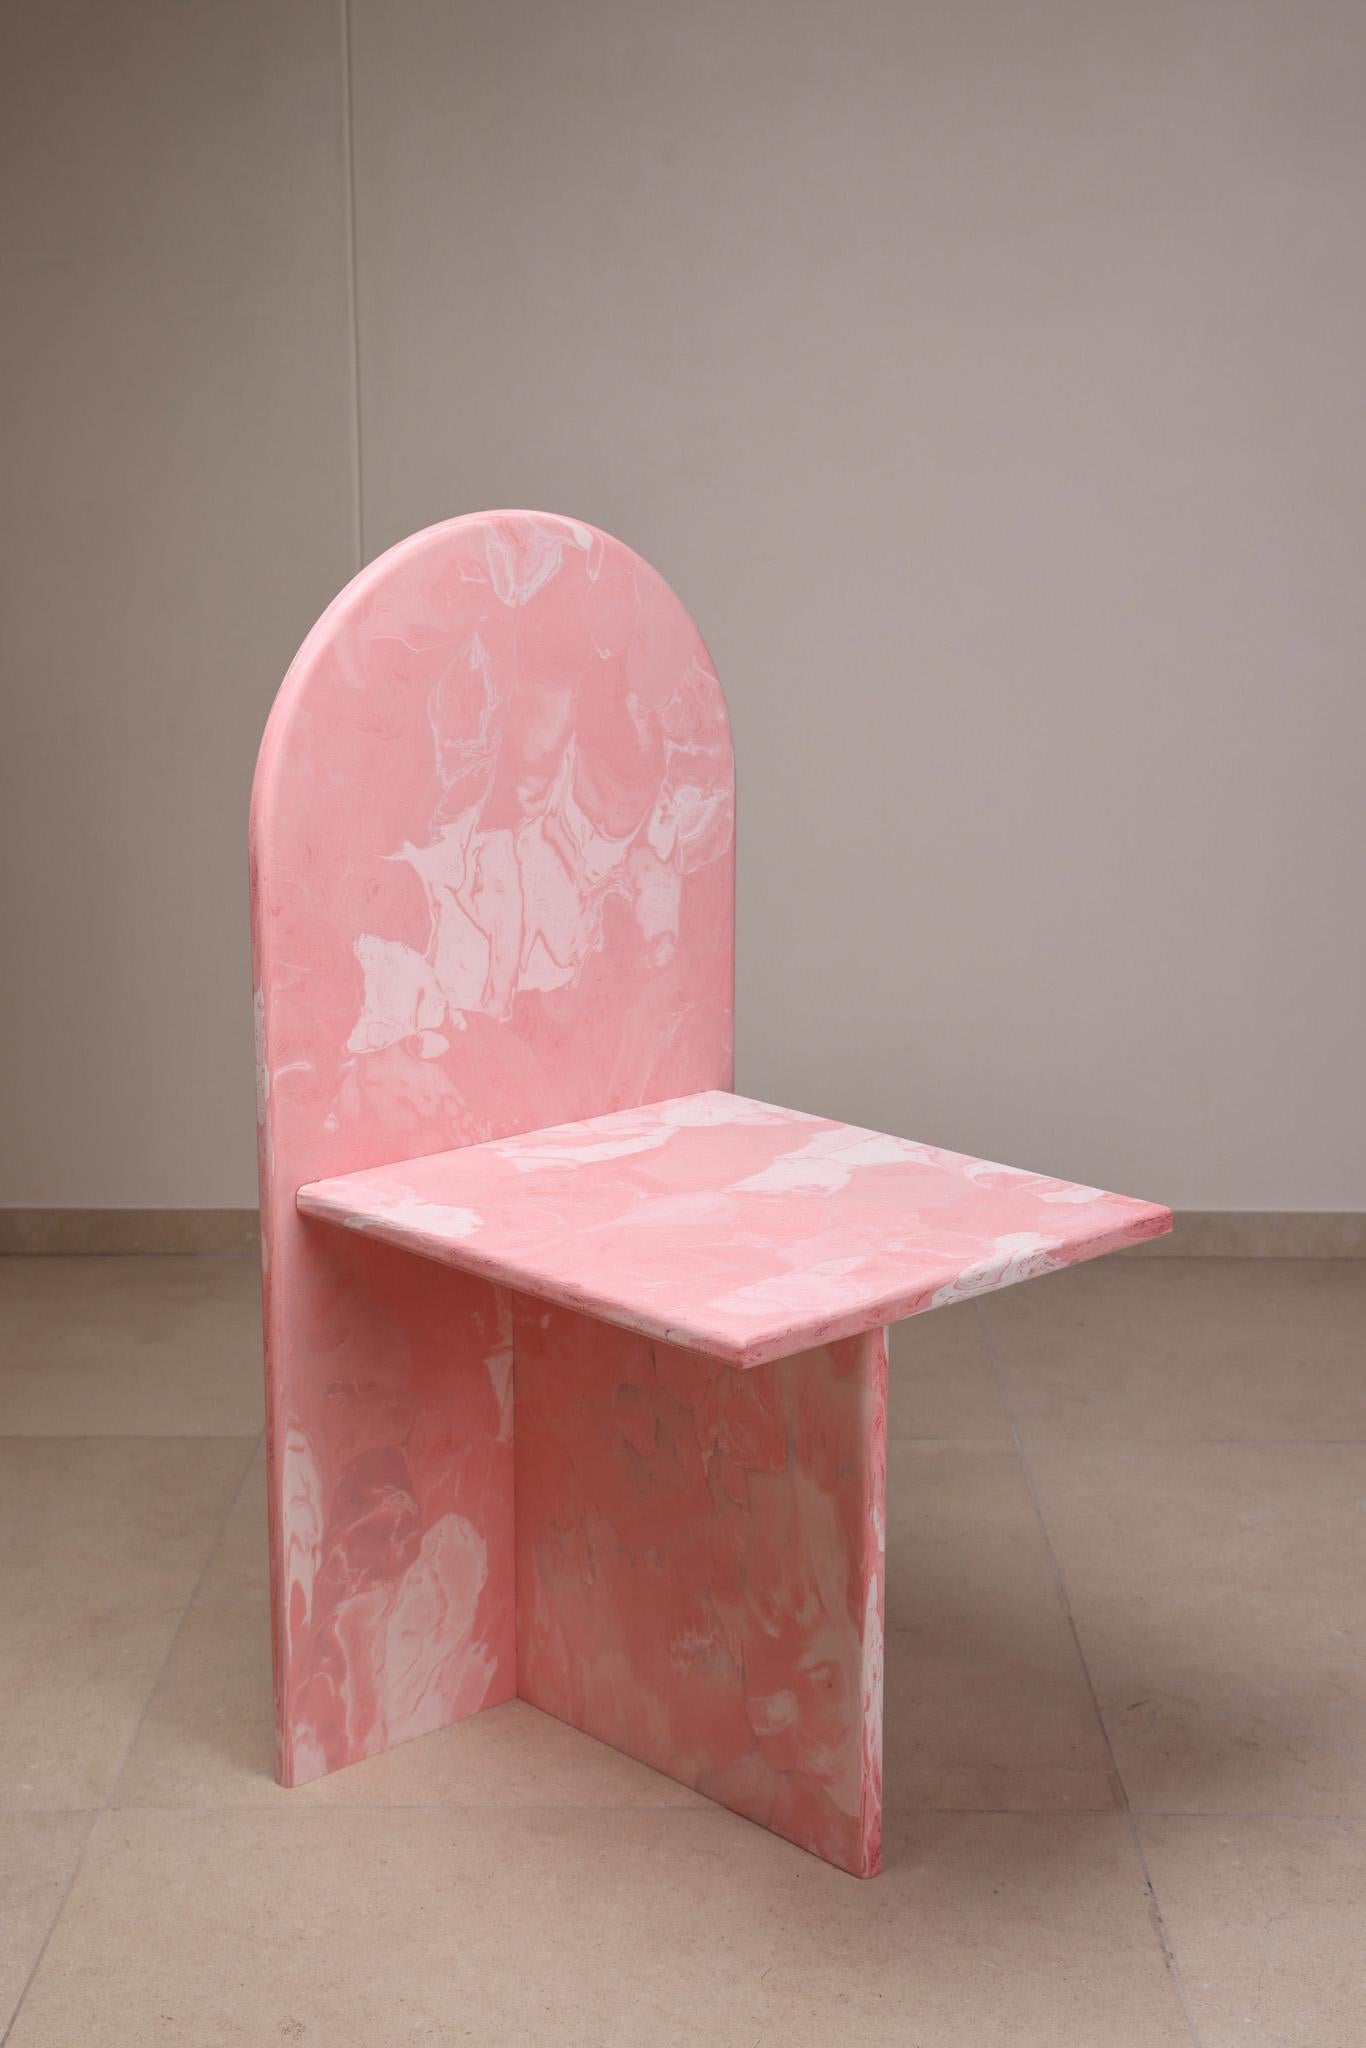 Contemporary Pink Chair Hand-Crafted from 100% Recycled Plastic by Anqa Studios For Sale 2